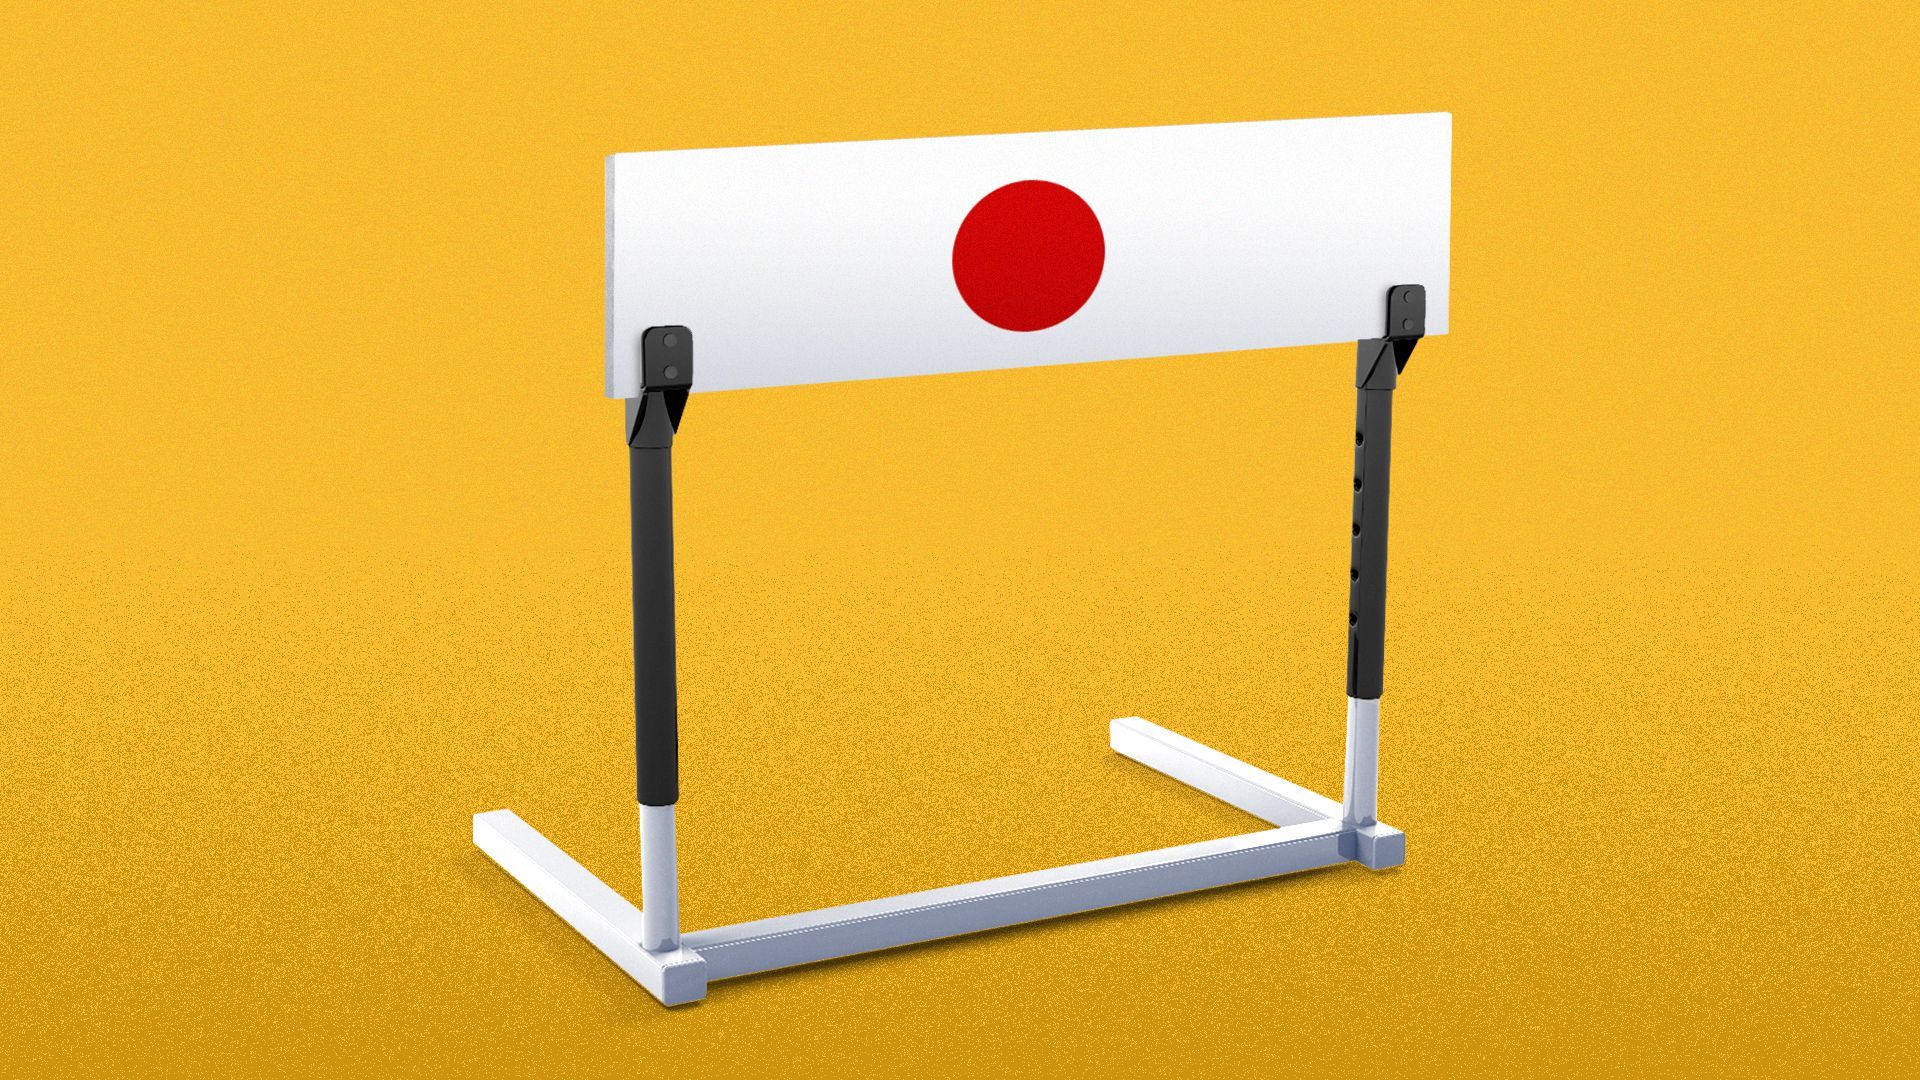 Illustration of a hurdle with the flag of Japan as the bar. 